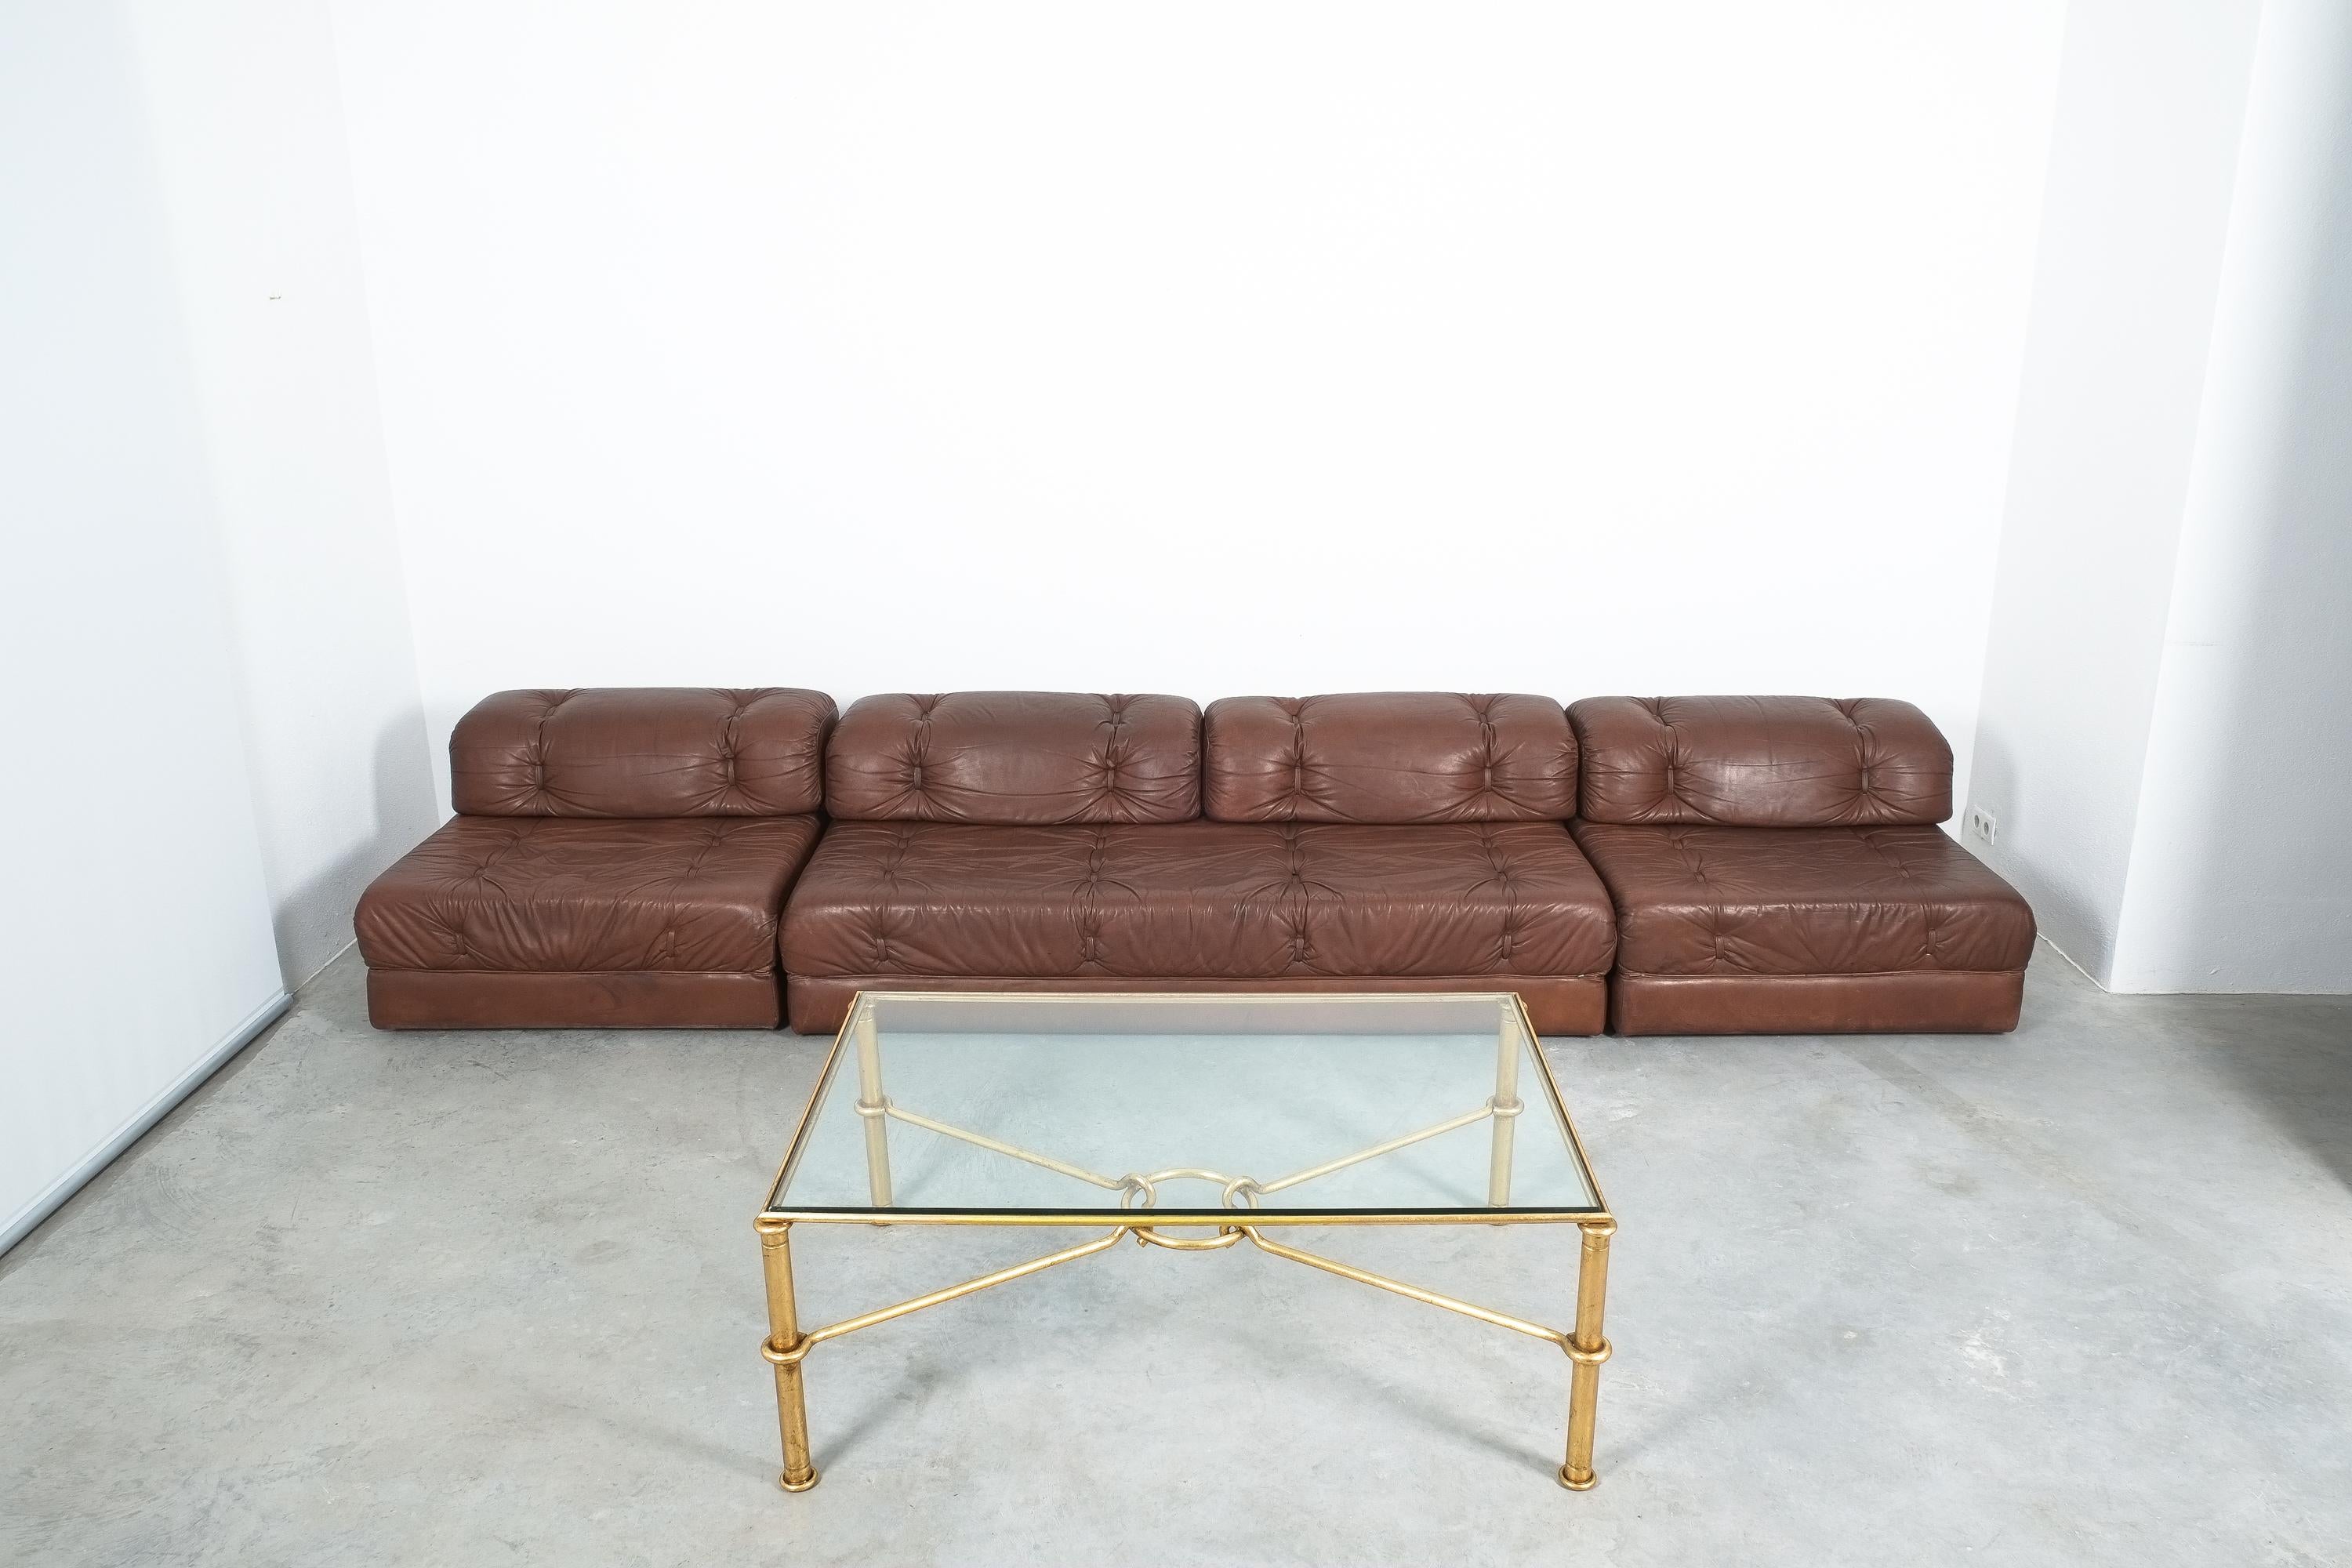 Late 20th Century Hermes Gilt Iron Coffee Table by Giovanni Banci, Italy, Midcentury